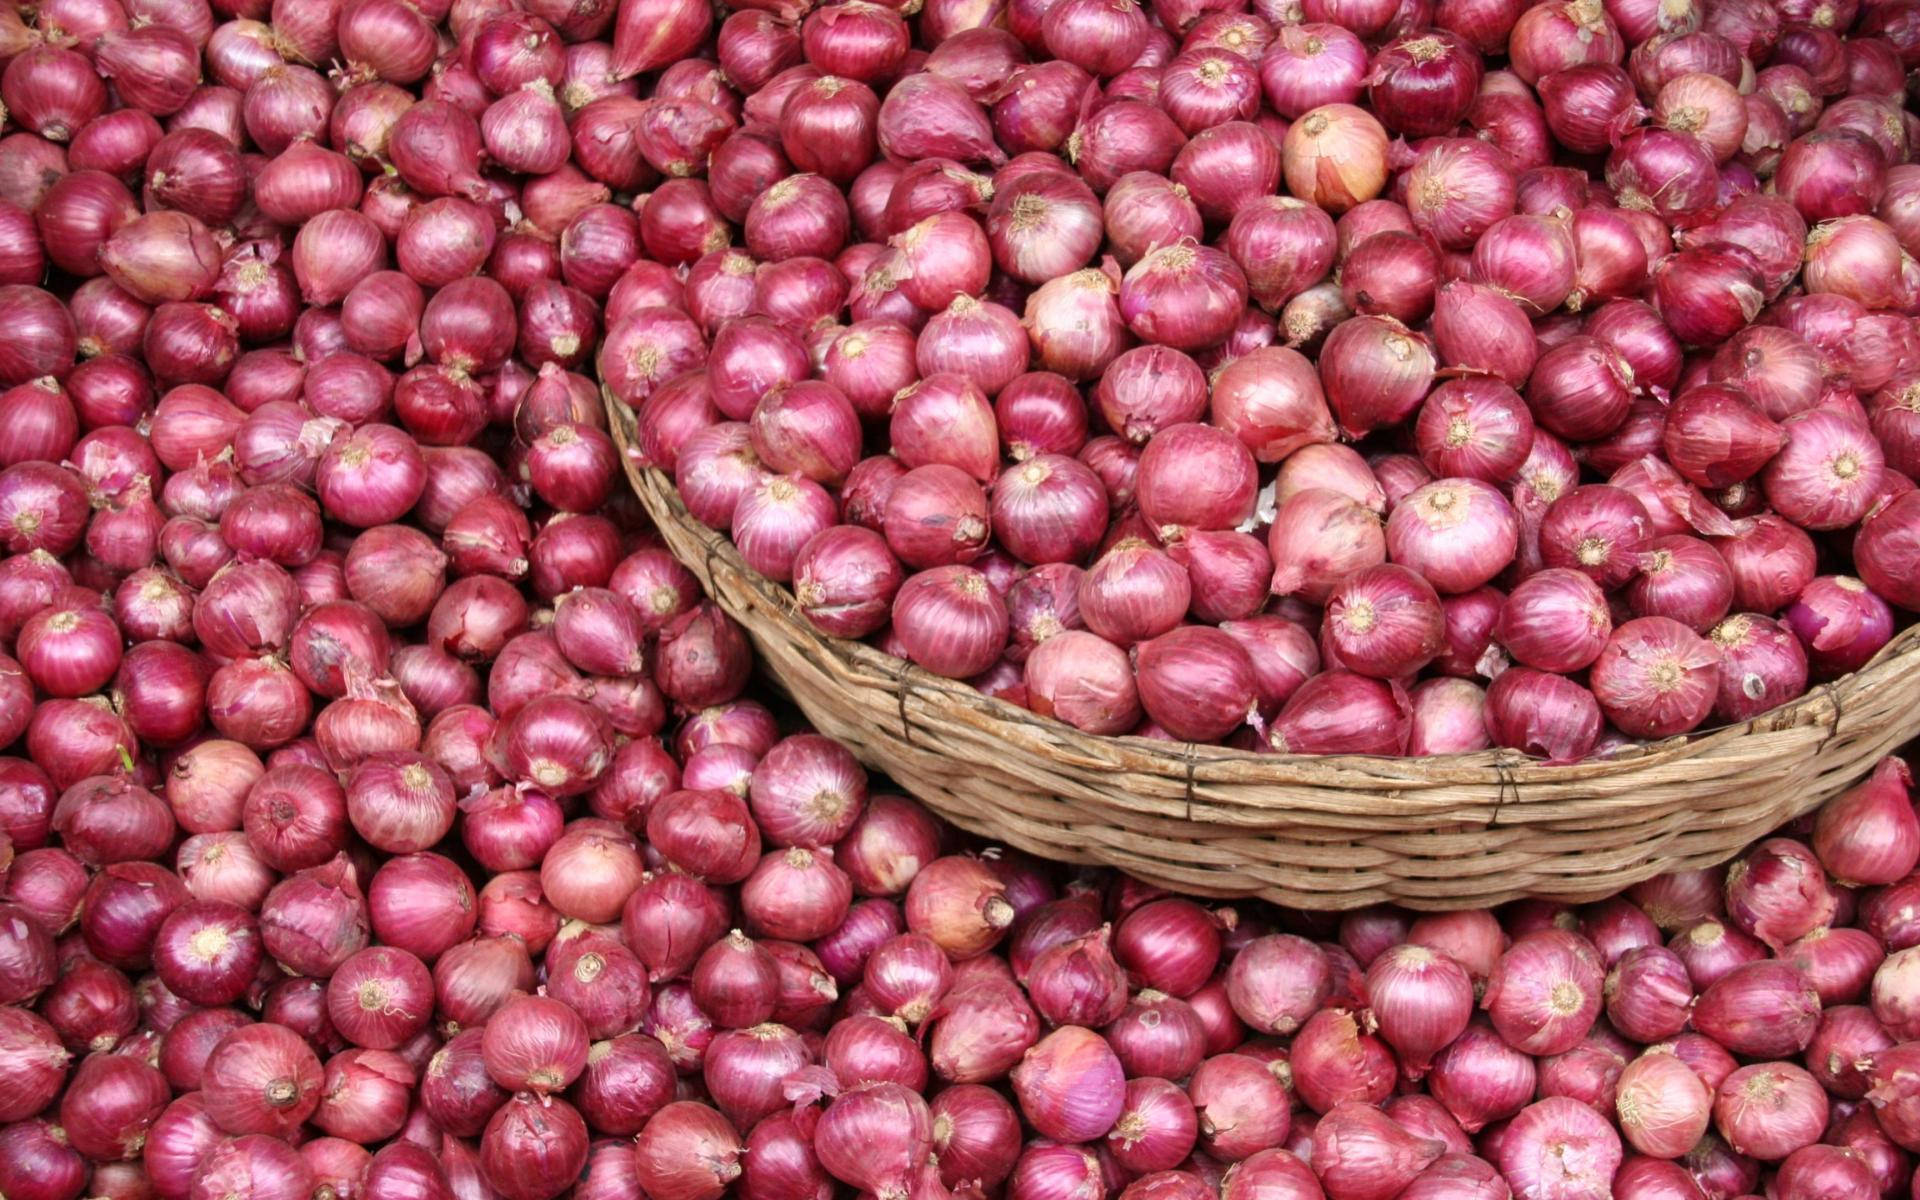 Wooden Basket Overflowing With Red Onions Wallpaper